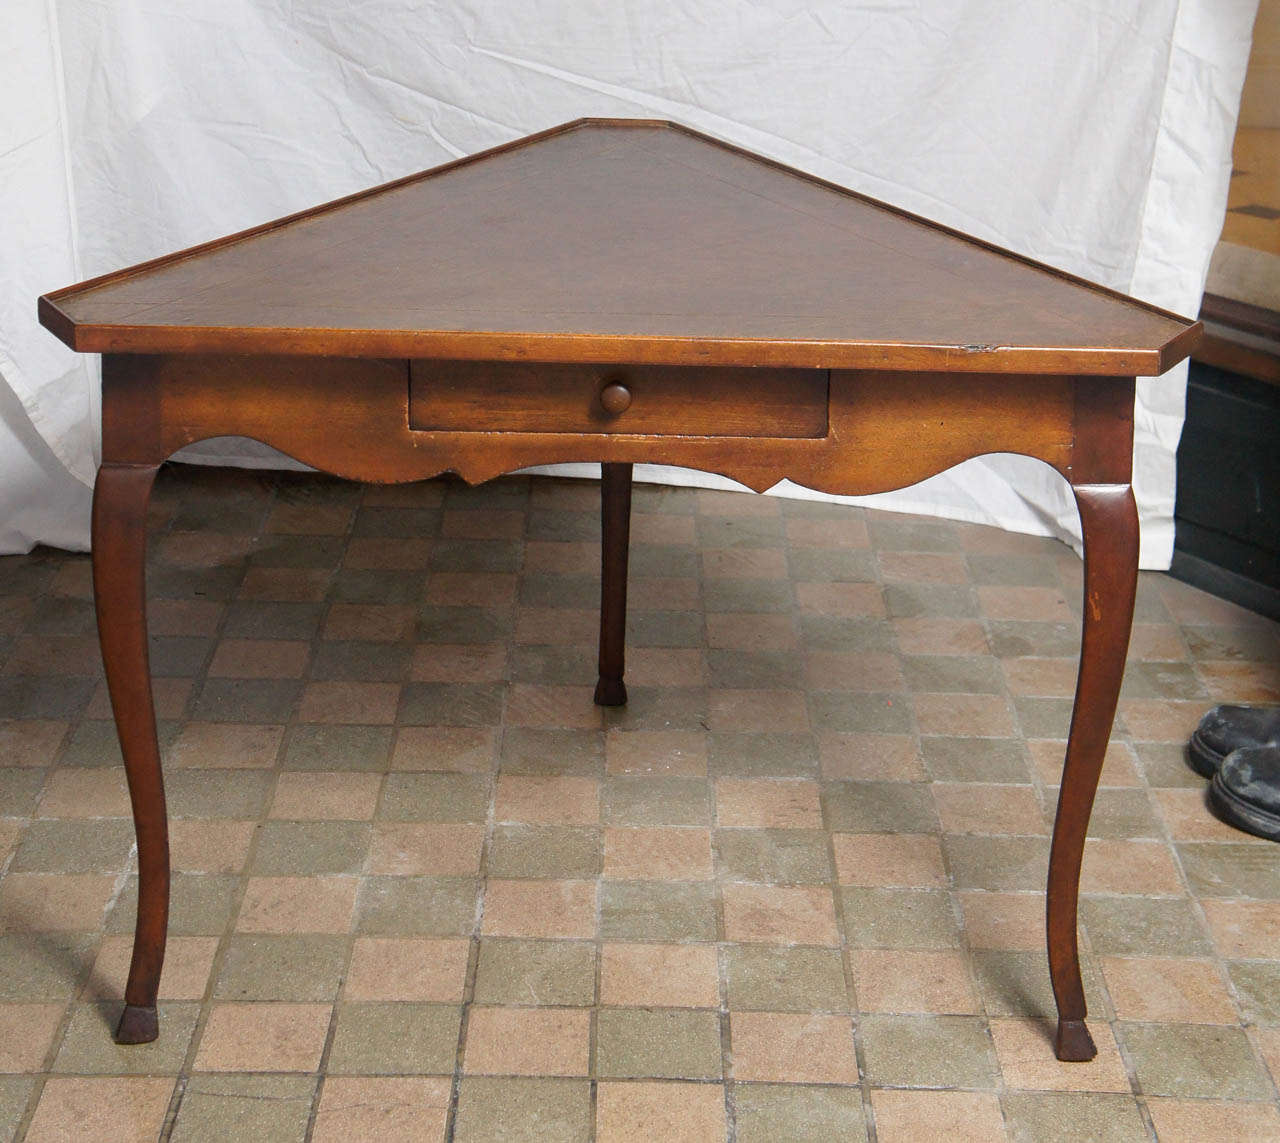 Made in the 60's this lovely pair of tables  sold through Yale Burgess are mostly likely made in France for export to this country. The walnut has a nice old color showing the attention to detail the firm is best know for. Designed in a Louis XV